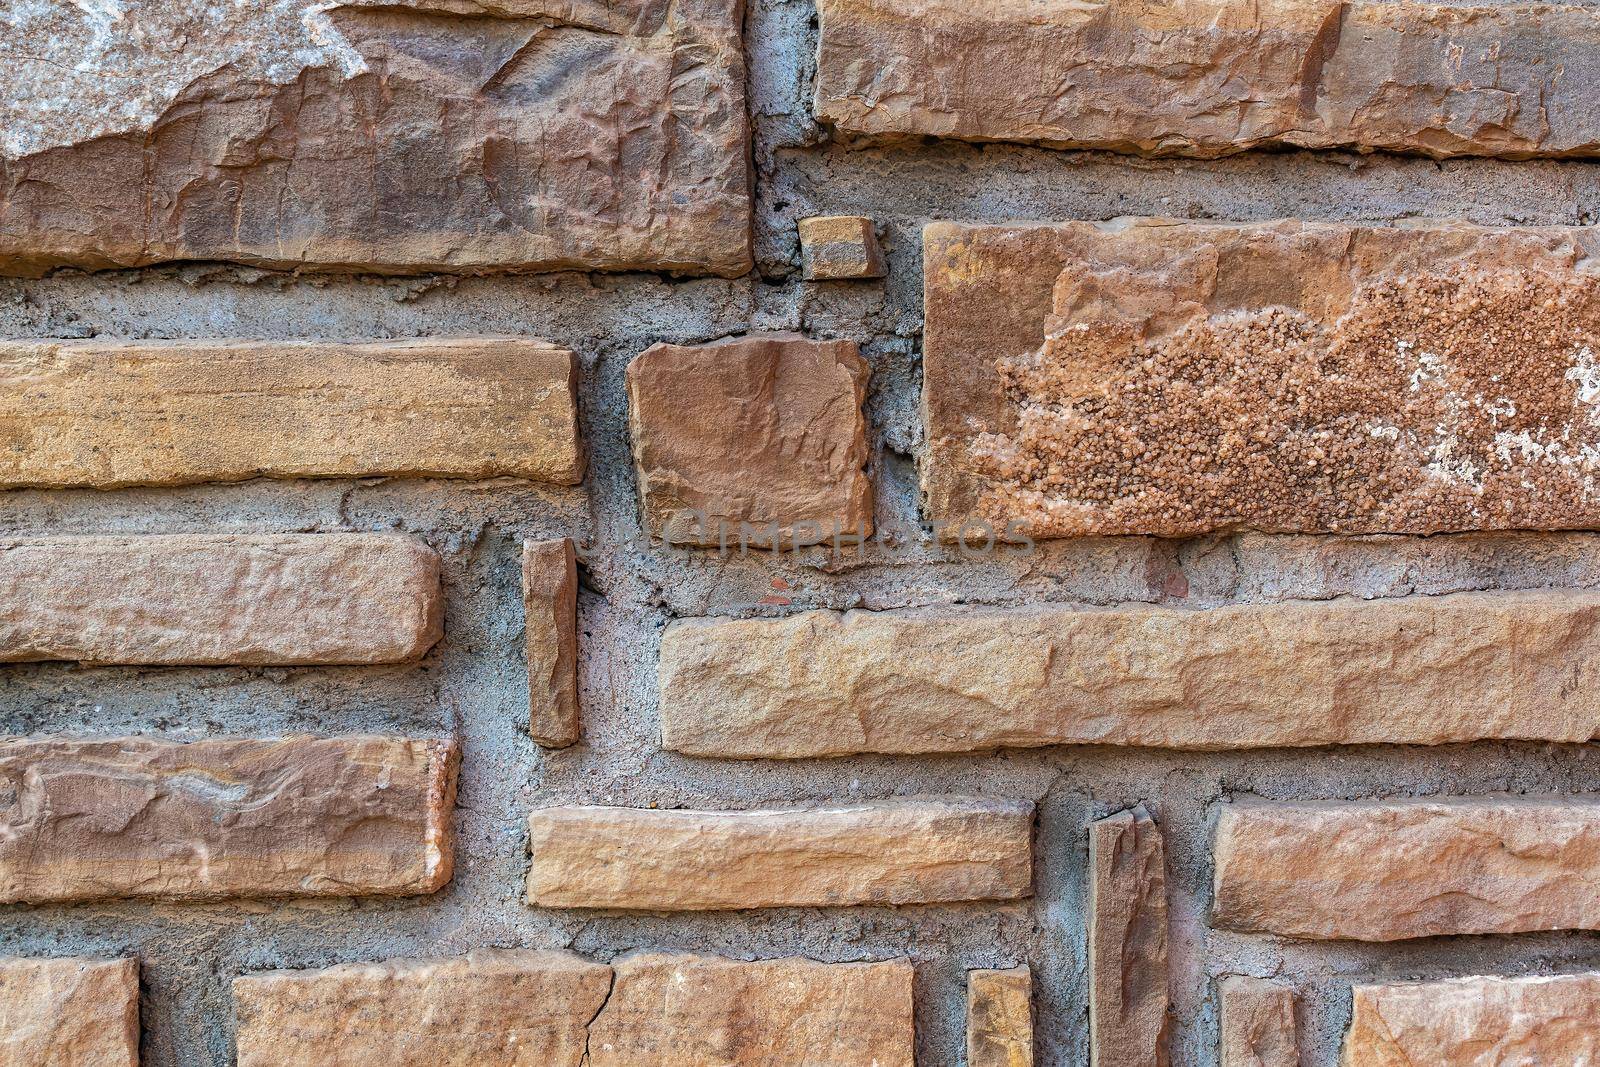 Wall composed of rectangular segments of stone Texture, background for further work.